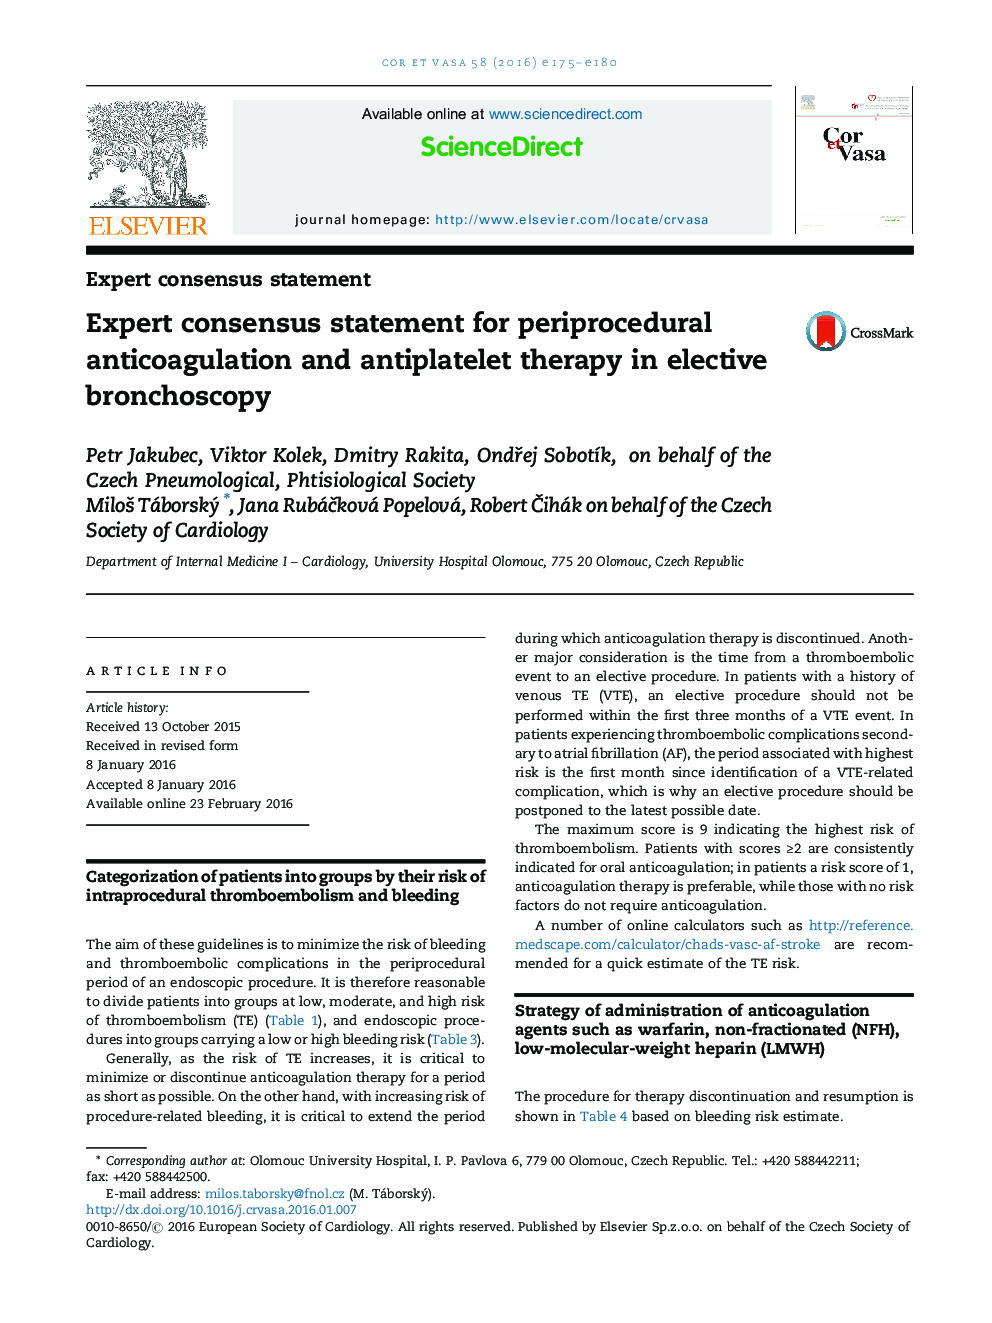 Expert consensus statement for periprocedural anticoagulation and antiplatelet therapy in elective bronchoscopy